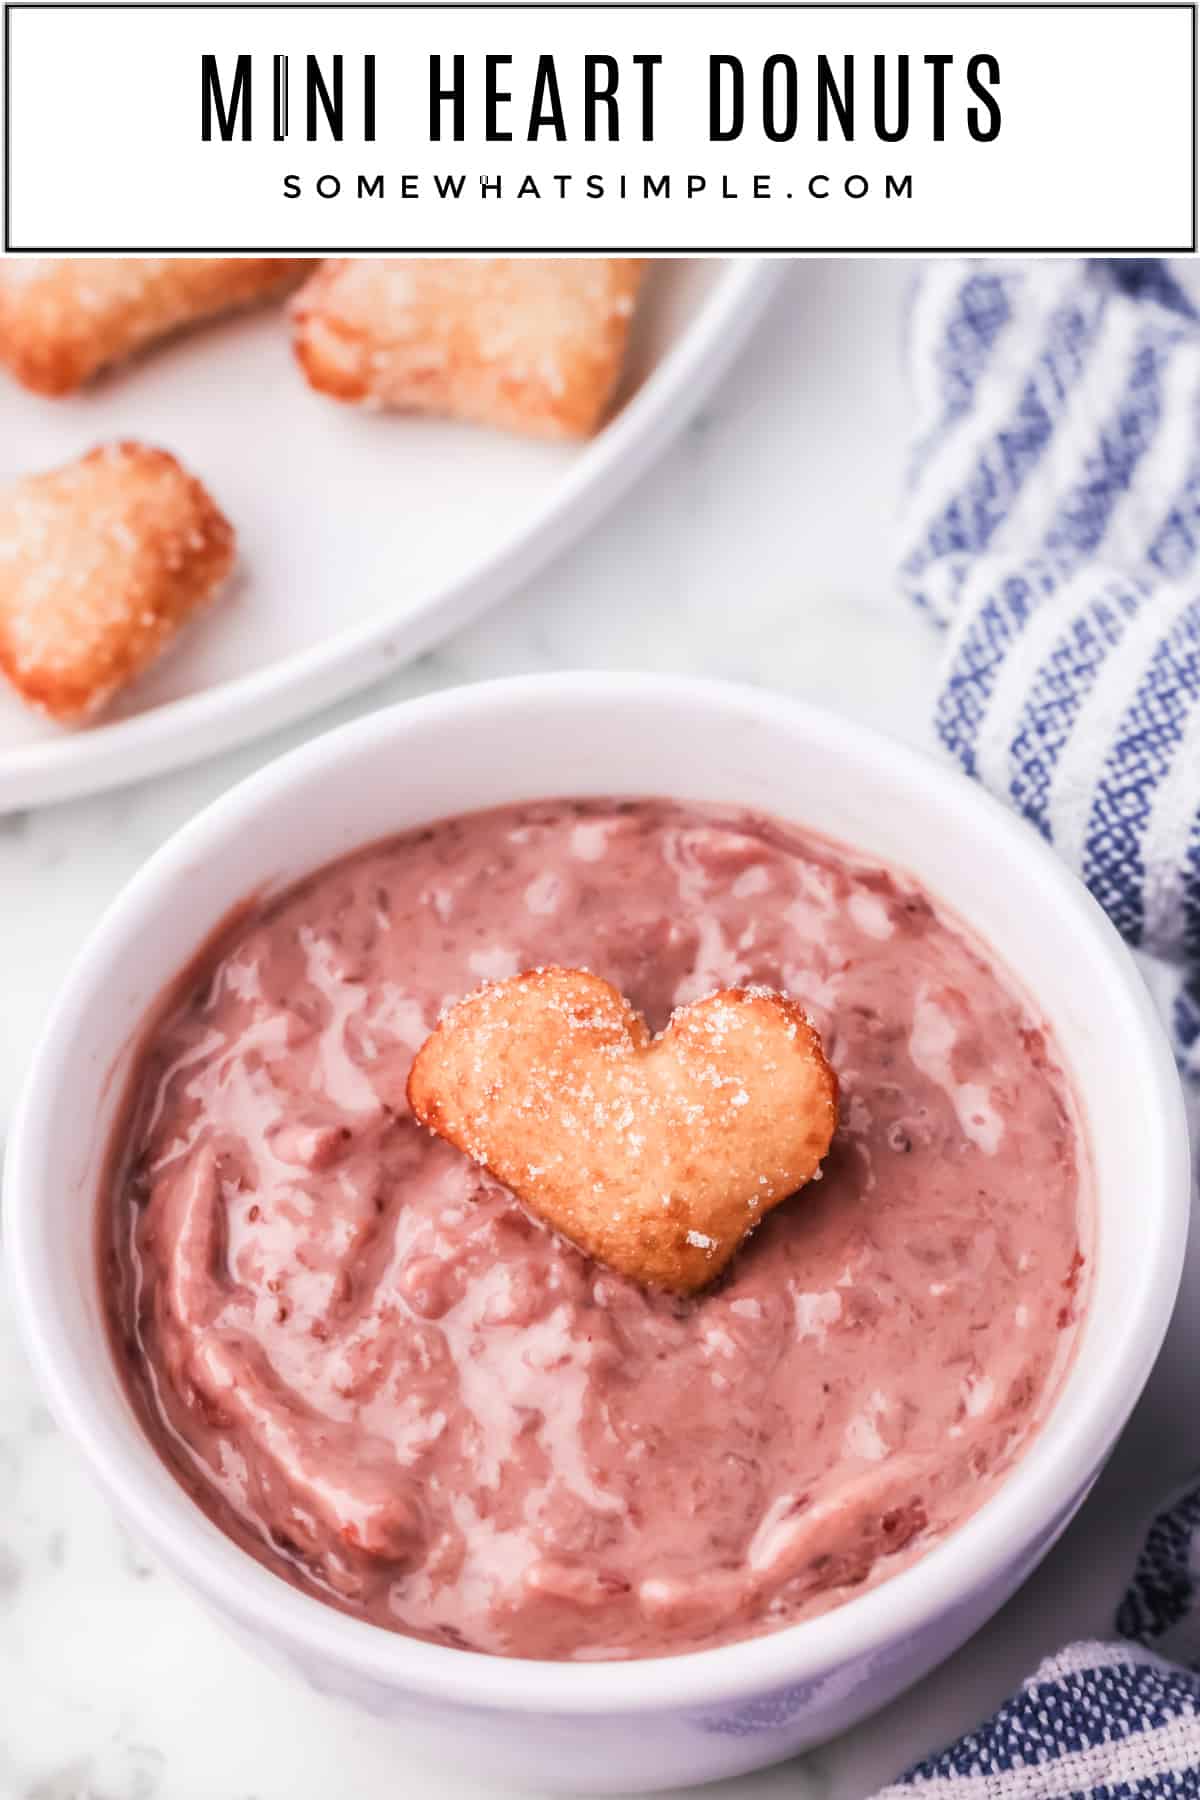 These adorable mini heart donuts are served with a sweet strawberry sauce that's perfect for Valentine's Day or any special occasion! via @somewhatsimple